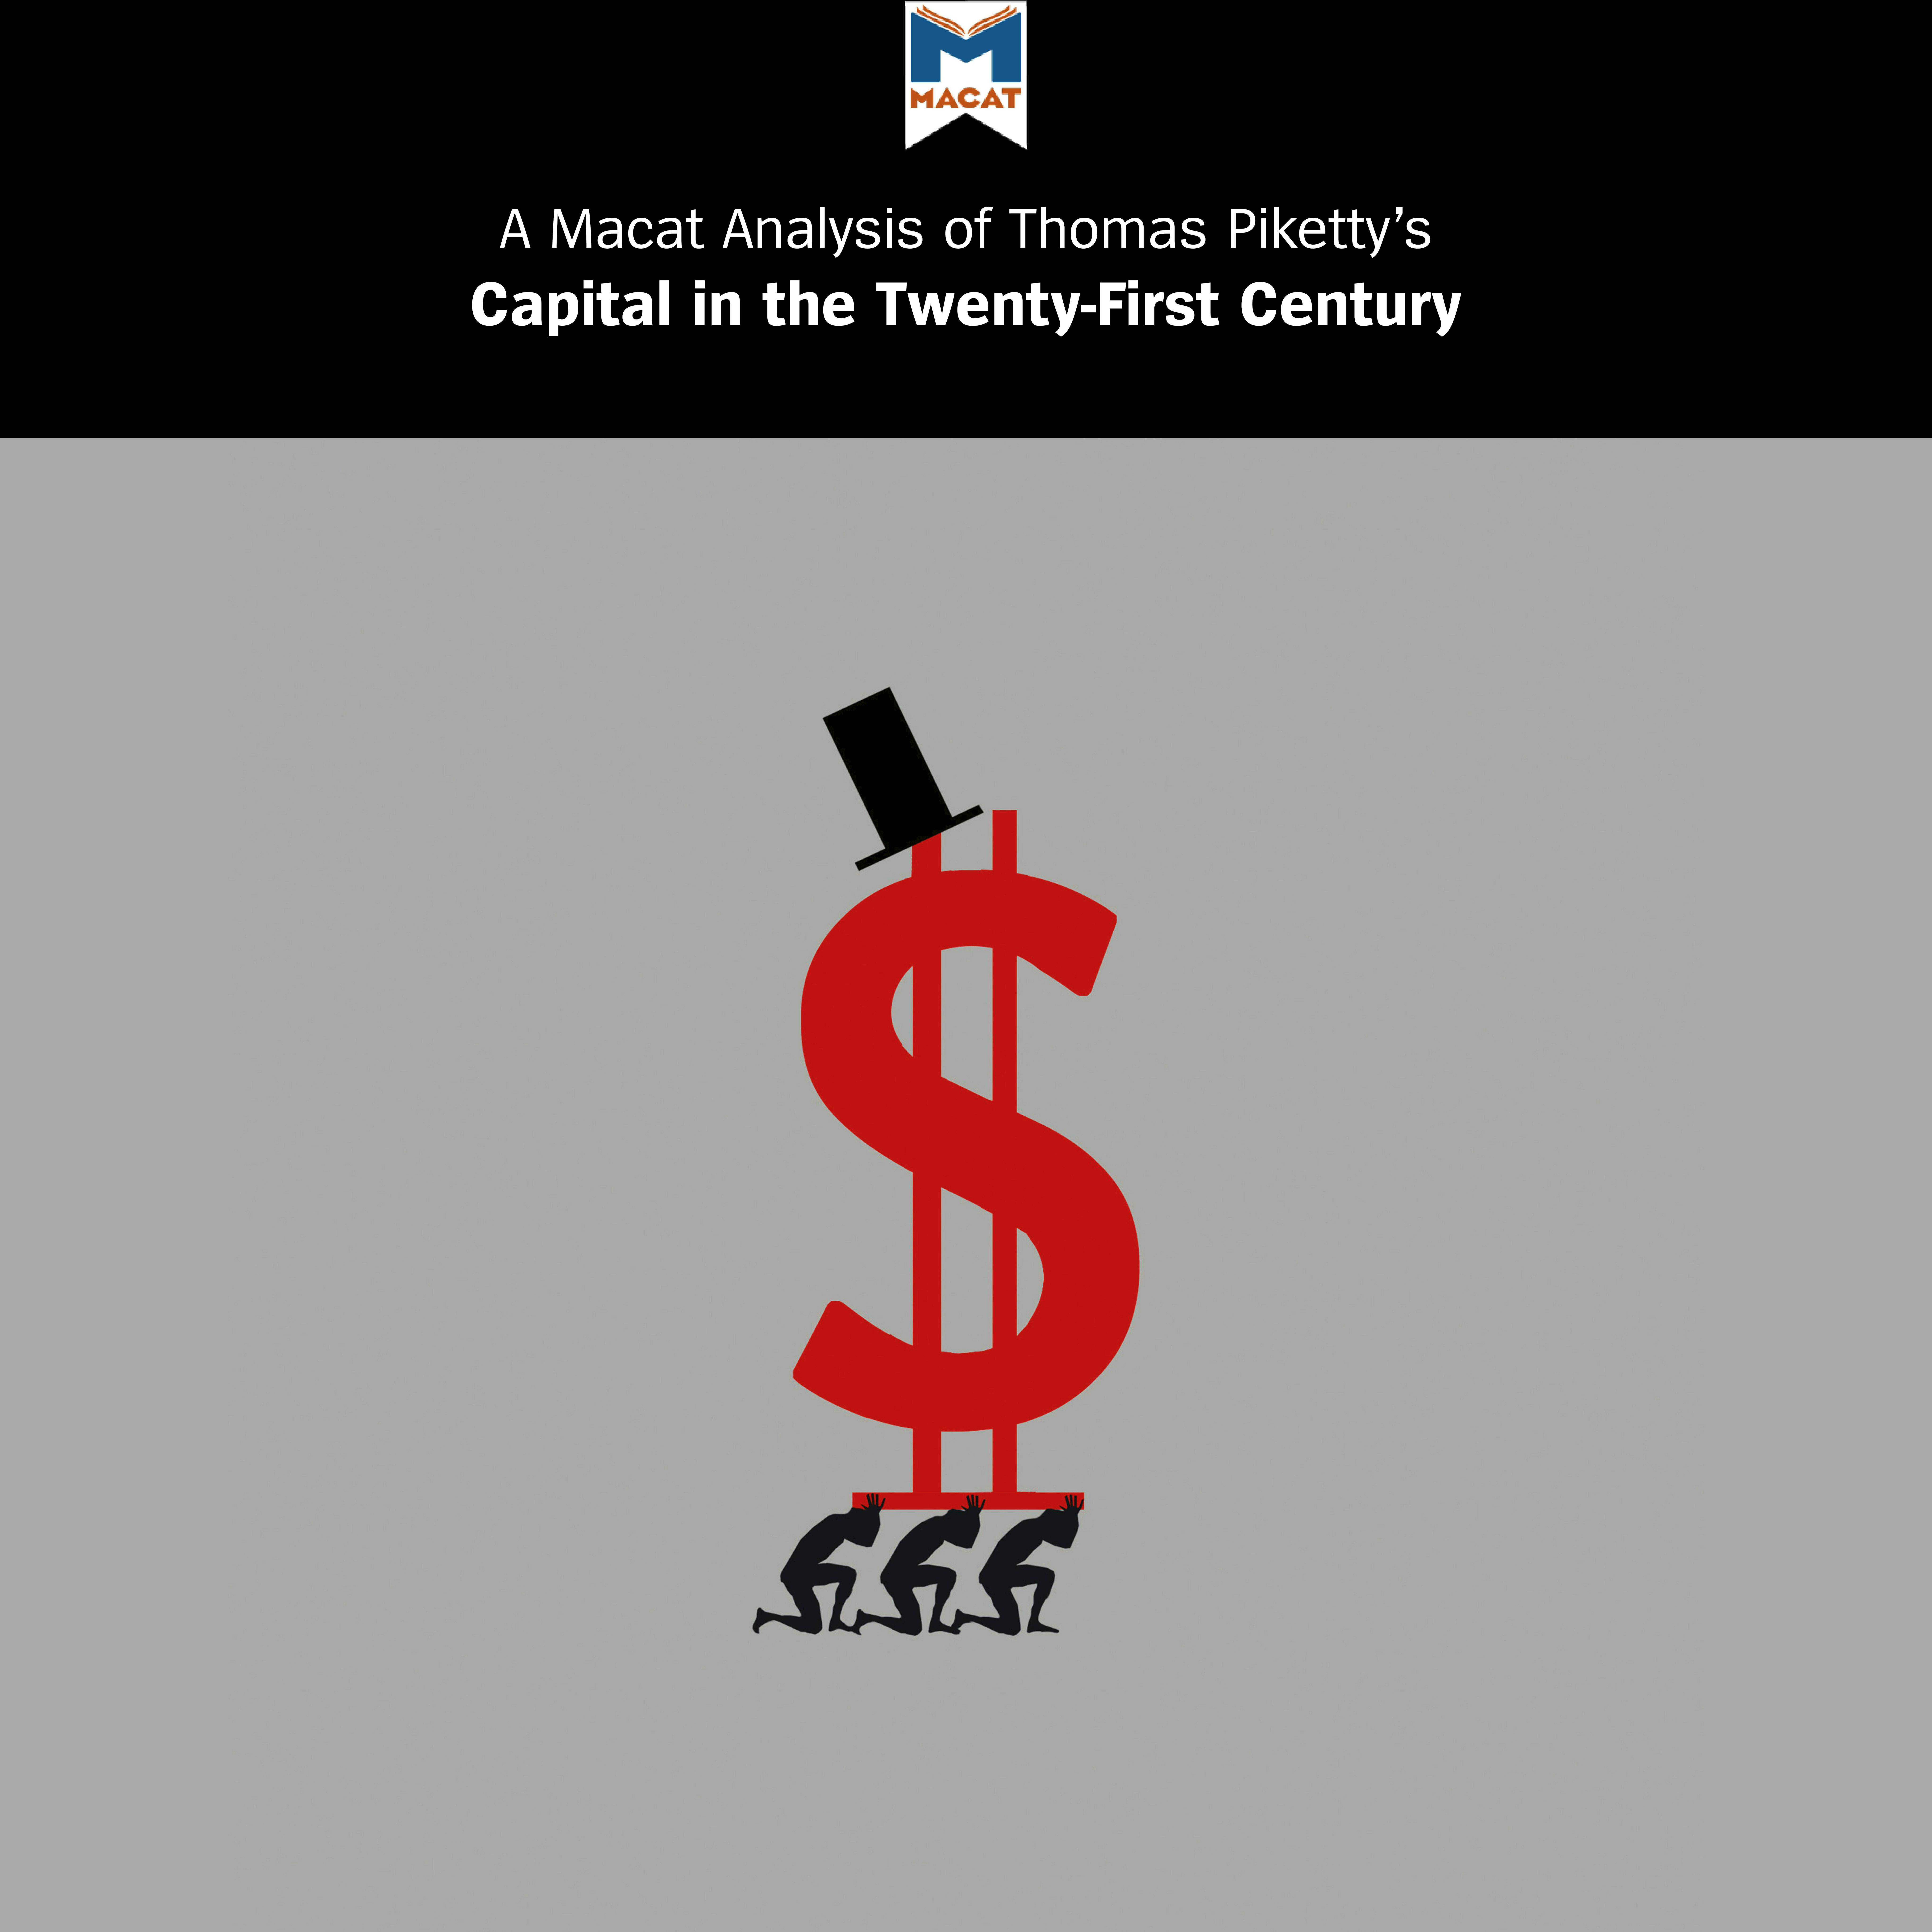 A Macat Analysis of Thomas Piketty's Capital in the Twenty-First Century - undefined